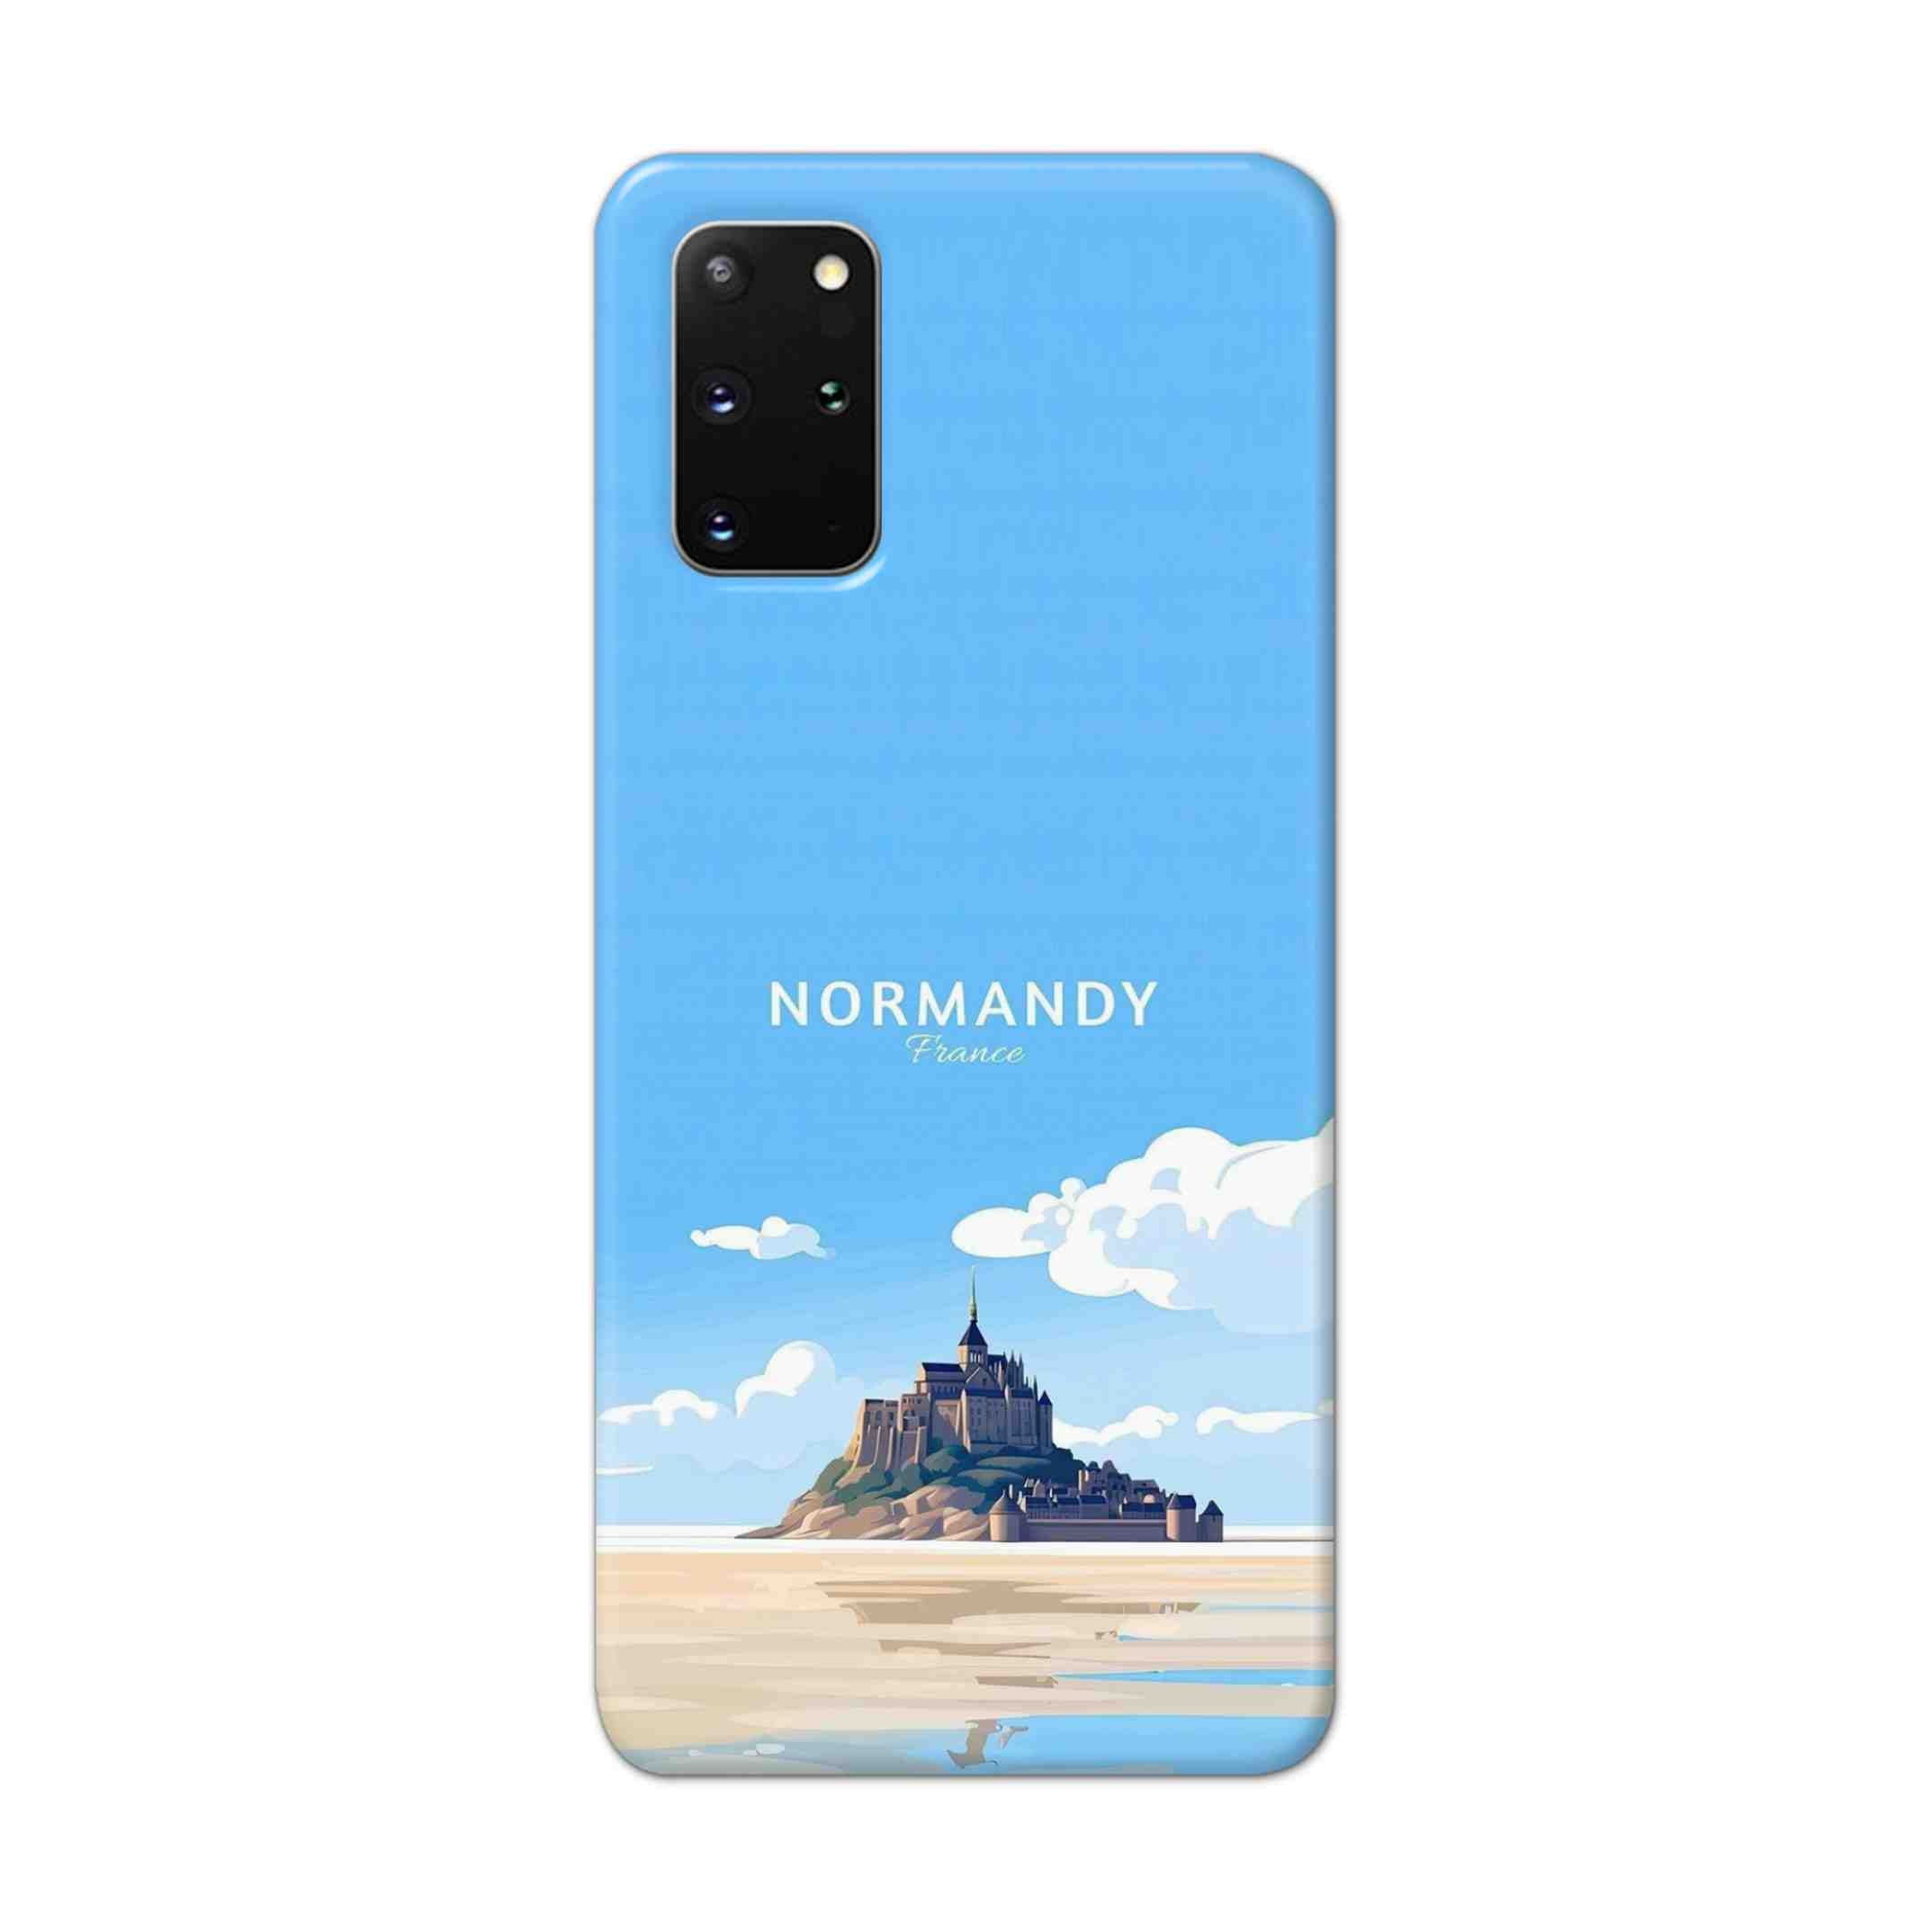 Buy Normandy Hard Back Mobile Phone Case Cover For Samsung Galaxy S20 Plus Online